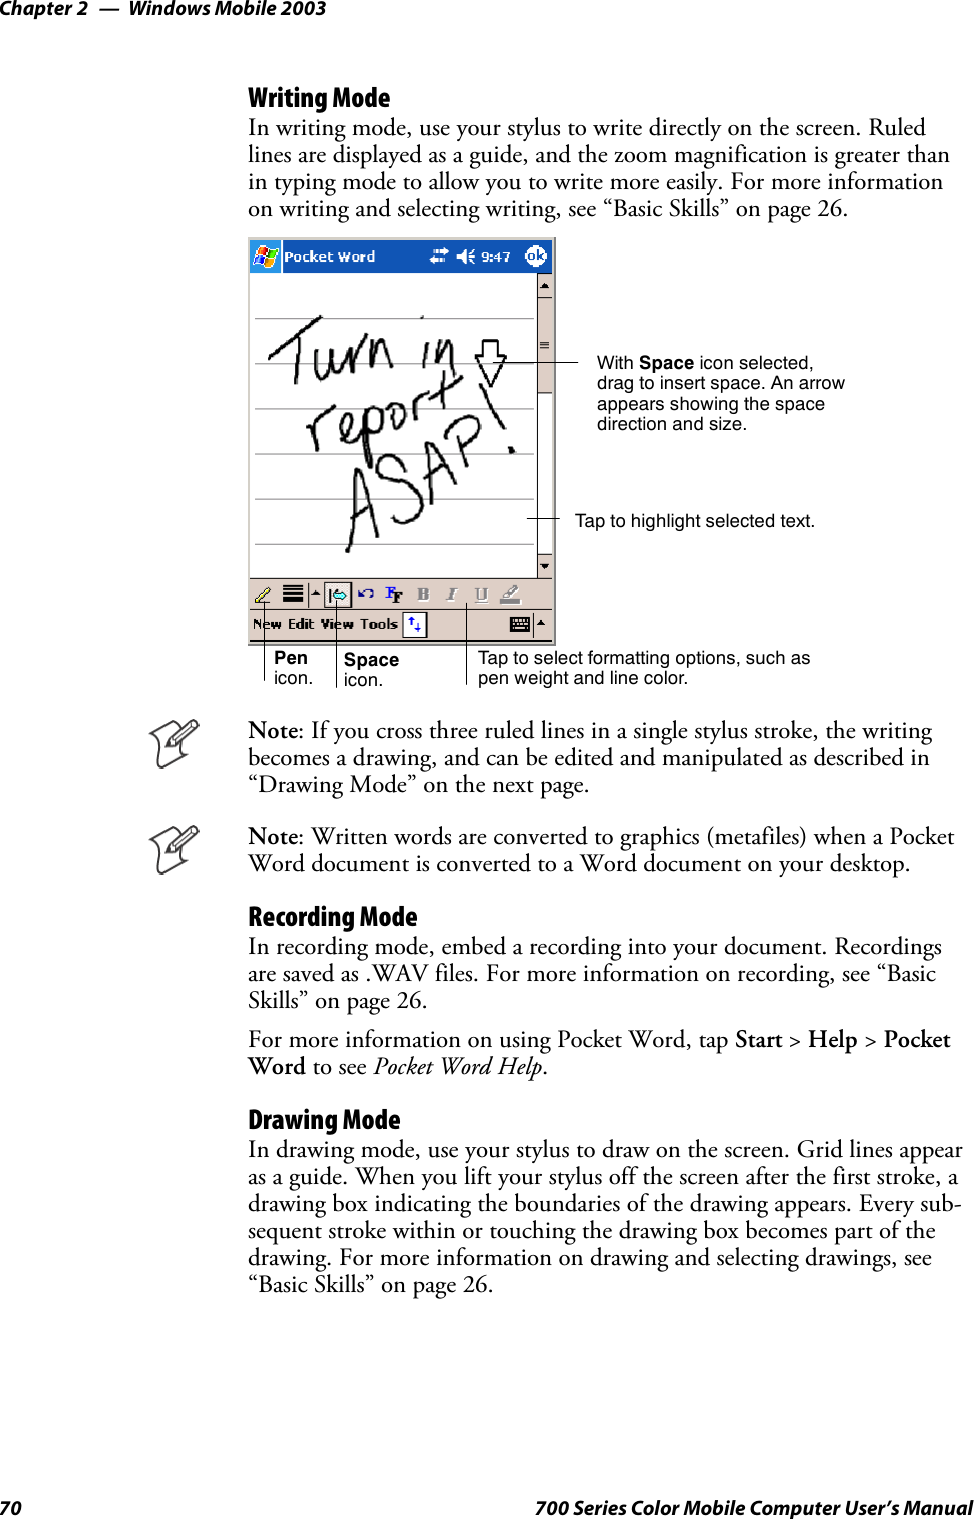 Windows Mobile 2003Chapter —270 700 Series Color Mobile Computer User’s ManualWriting ModeIn writing mode, use your stylus to write directly on the screen. Ruledlines are displayed as a guide, and the zoom magnification is greater thanin typing mode to allow you to write more easily. For more informationon writing and selecting writing, see “Basic Skills” on page 26.Tap to select formatting options, such aspen weight and line color.With Space icon selected,drag to insert space. An arrowappears showing the spacedirection and size.Tap to highlight selected text.Spaceicon.Penicon.Note: If you cross three ruled lines in a single stylus stroke, the writingbecomes a drawing, and can be edited and manipulated as described in“Drawing Mode” on the next page.Note: Written words are converted to graphics (metafiles) when a PocketWord document is converted to a Word document on your desktop.Recording ModeIn recording mode, embed a recording into your document. Recordingsare saved as .WAV files. For more information on recording, see “BasicSkills” on page 26.For more information on using Pocket Word, tap Start &gt;Help &gt;PocketWord to see Pocket Word Help.Drawing ModeIn drawing mode, use your stylus to draw on the screen. Grid lines appearas a guide. When you lift your stylus off the screen after the first stroke, adrawing box indicating the boundaries of the drawing appears. Every sub-sequent stroke within or touching the drawing box becomes part of thedrawing. For more information on drawing and selecting drawings, see“Basic Skills” on page 26.